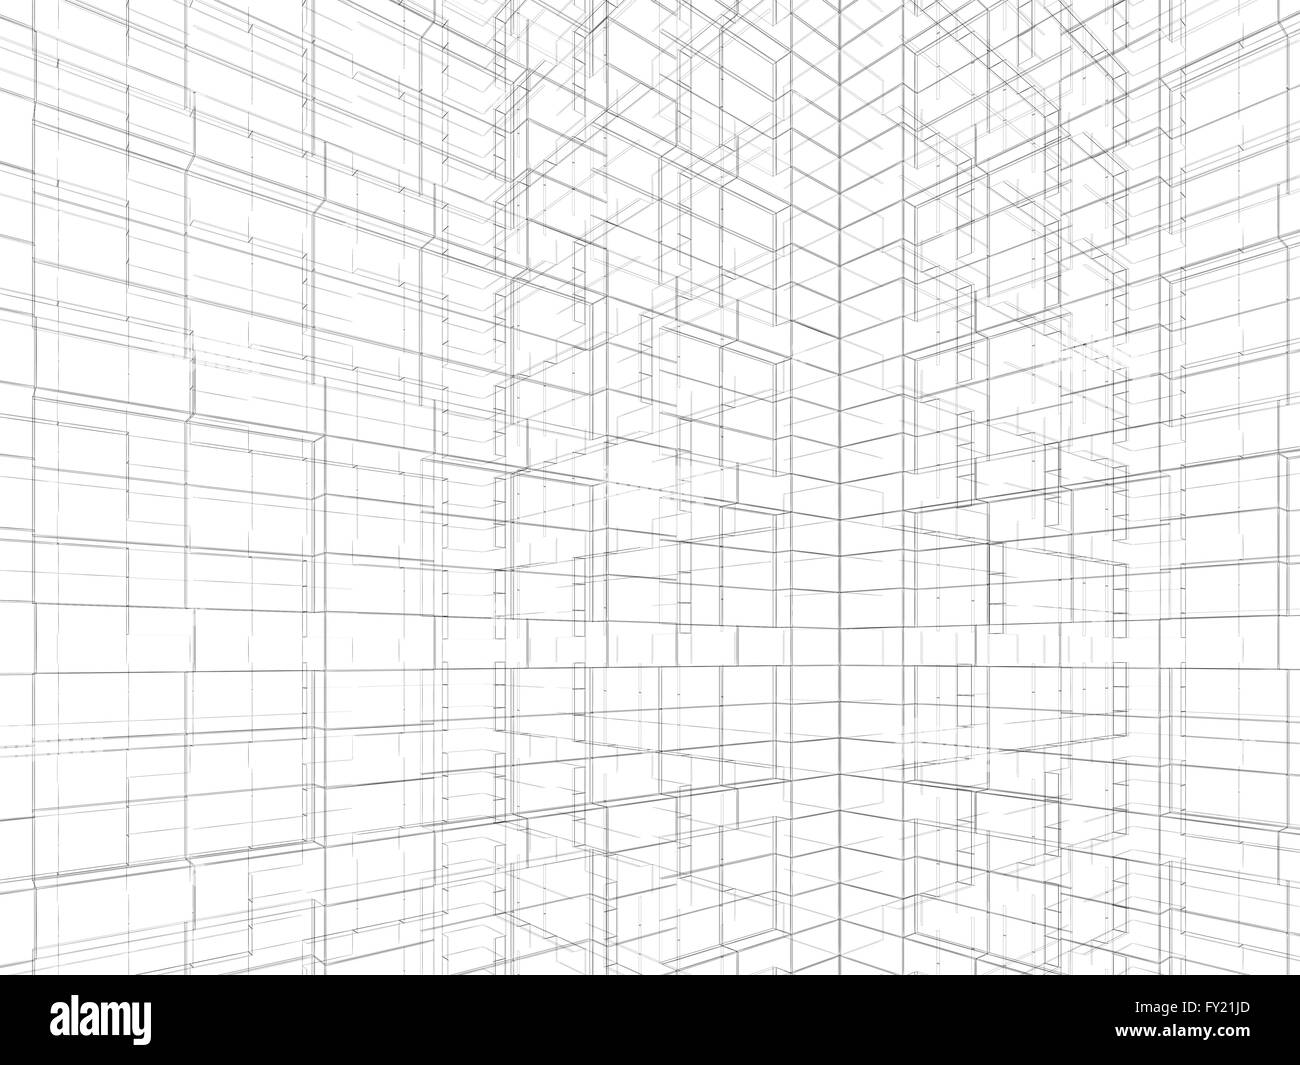 Abstract digital graphic background. Artificial geometric structures made of black wire frame lines on white background. 3d Stock Photo